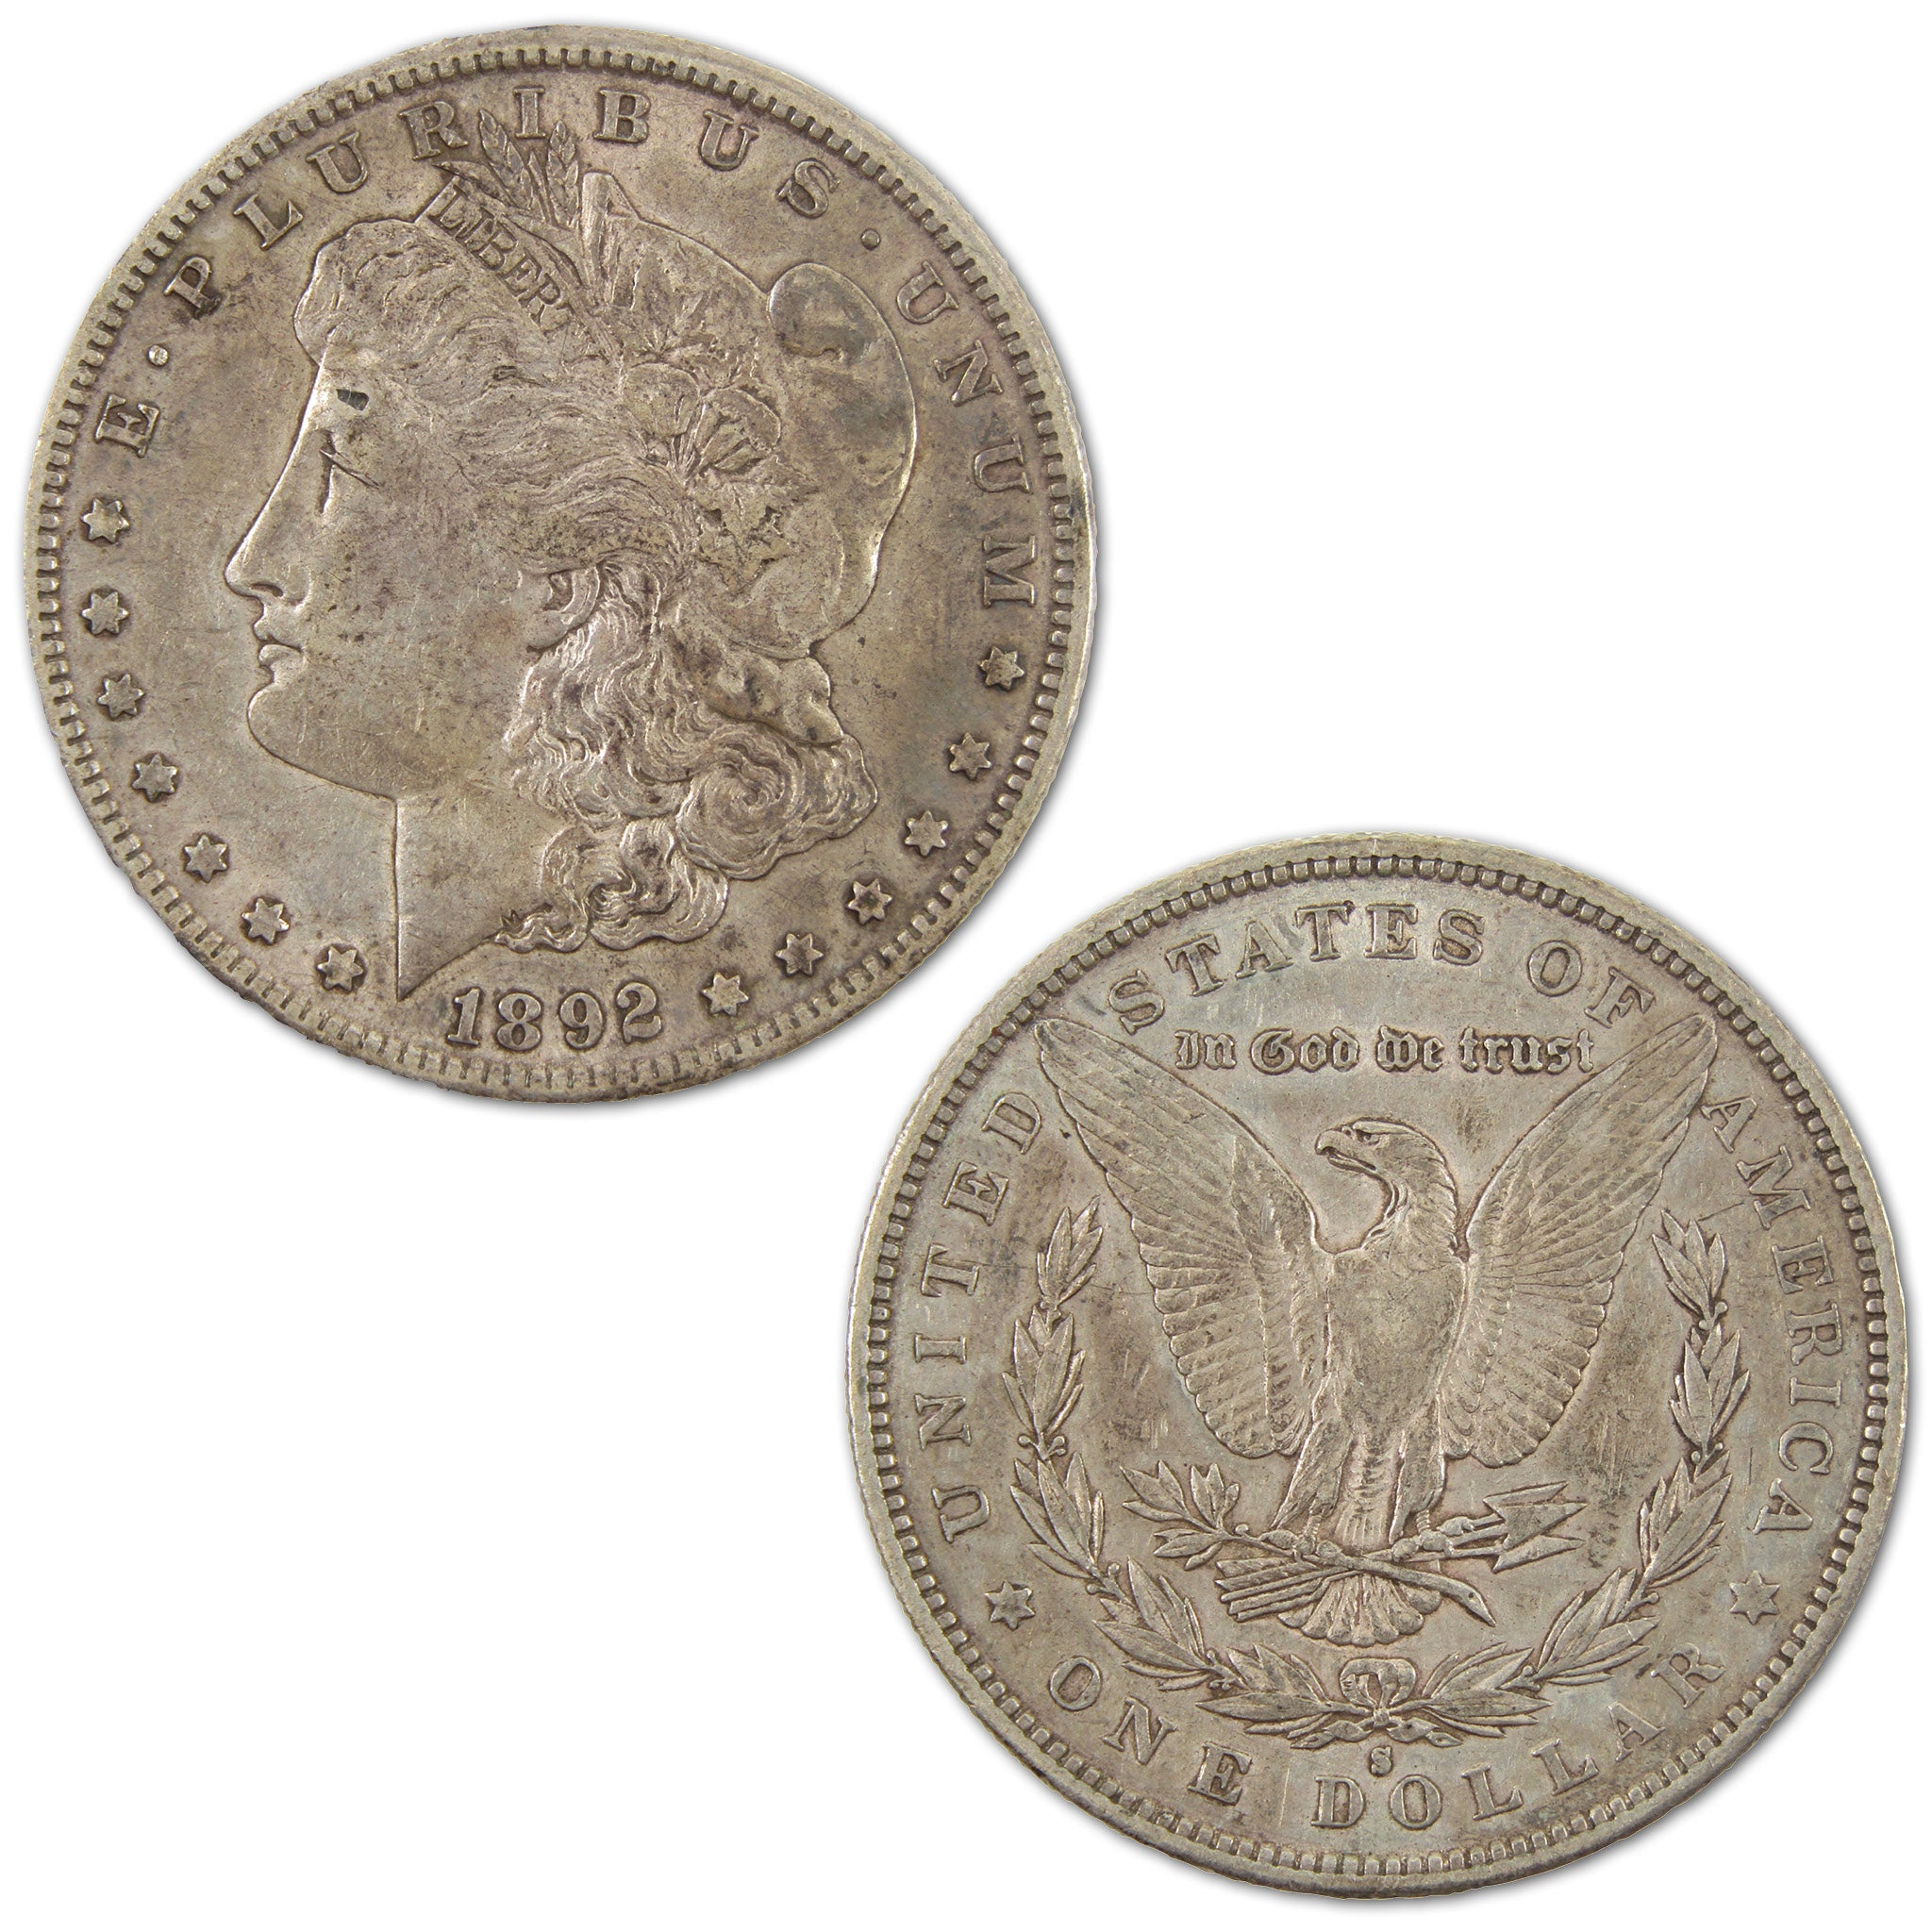 1892 S Morgan Dollar XF EF Extremely Fine Details Silver $1 SKU:I10760 - Morgan coin - Morgan silver dollar - Morgan silver dollar for sale - Profile Coins &amp; Collectibles